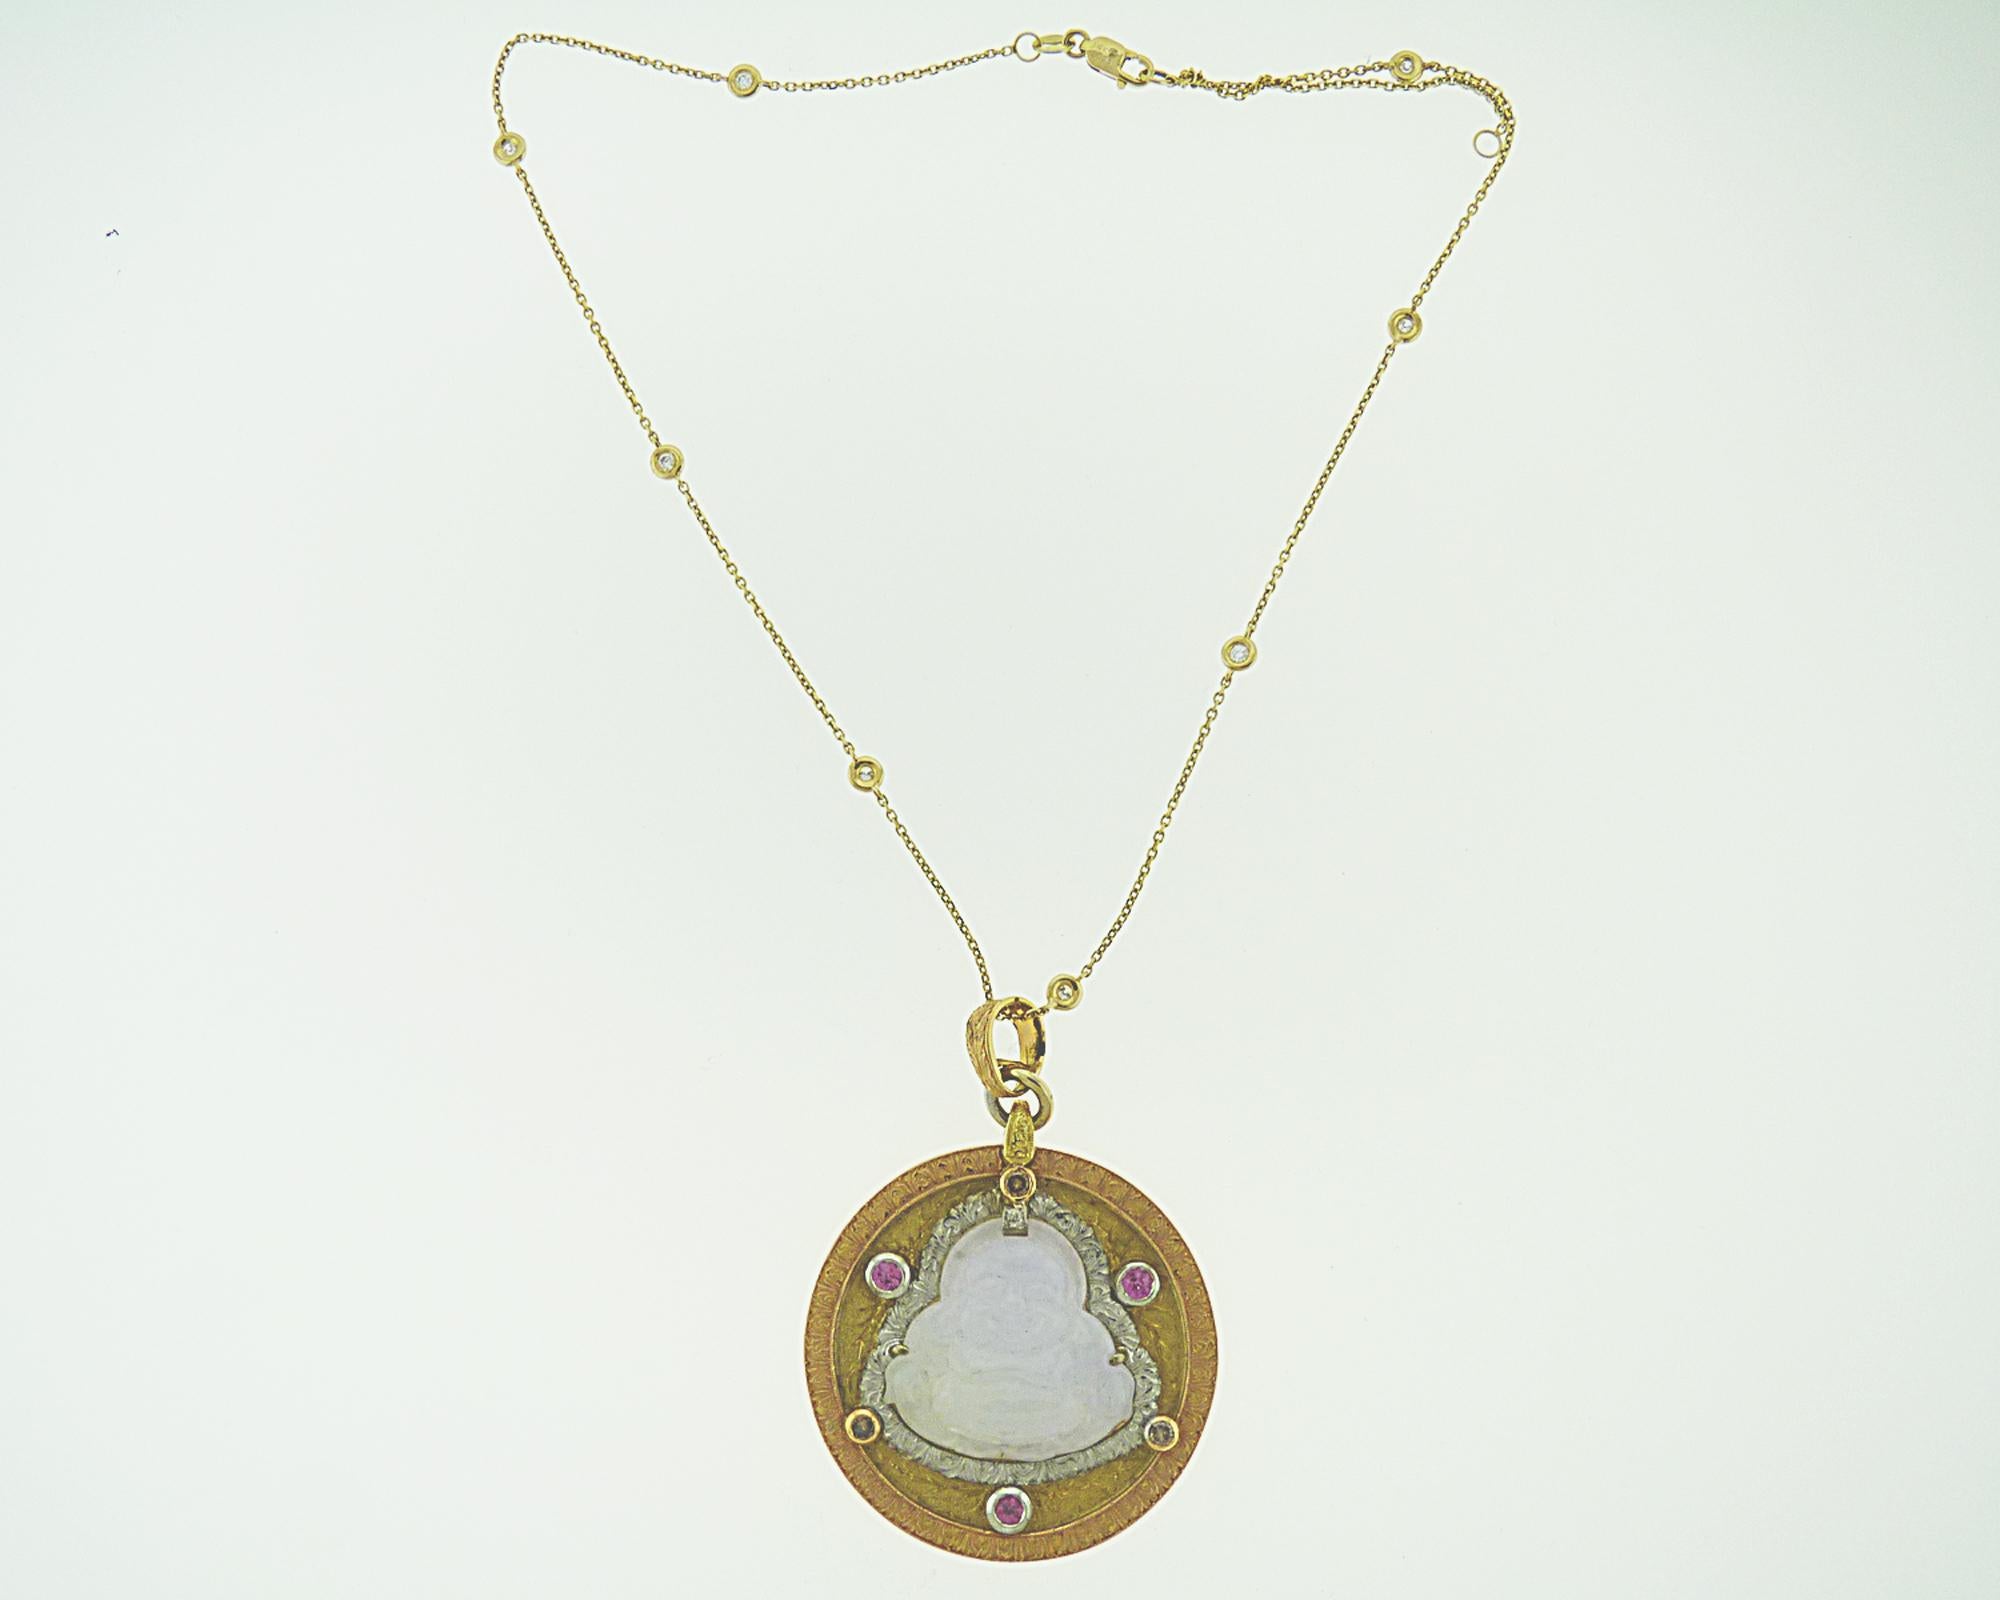 A unique Cazzaniga Pendant in 18K Yellow Gold with Diamonds, Ruby and Lavender Jade. 
Weight of the pendant is 30.10 grams. Embellished with 0.19 carat melee white diamonds. 
0.49 cart ruby and 22.50 carat lavender jade. 
Chain is not included.
